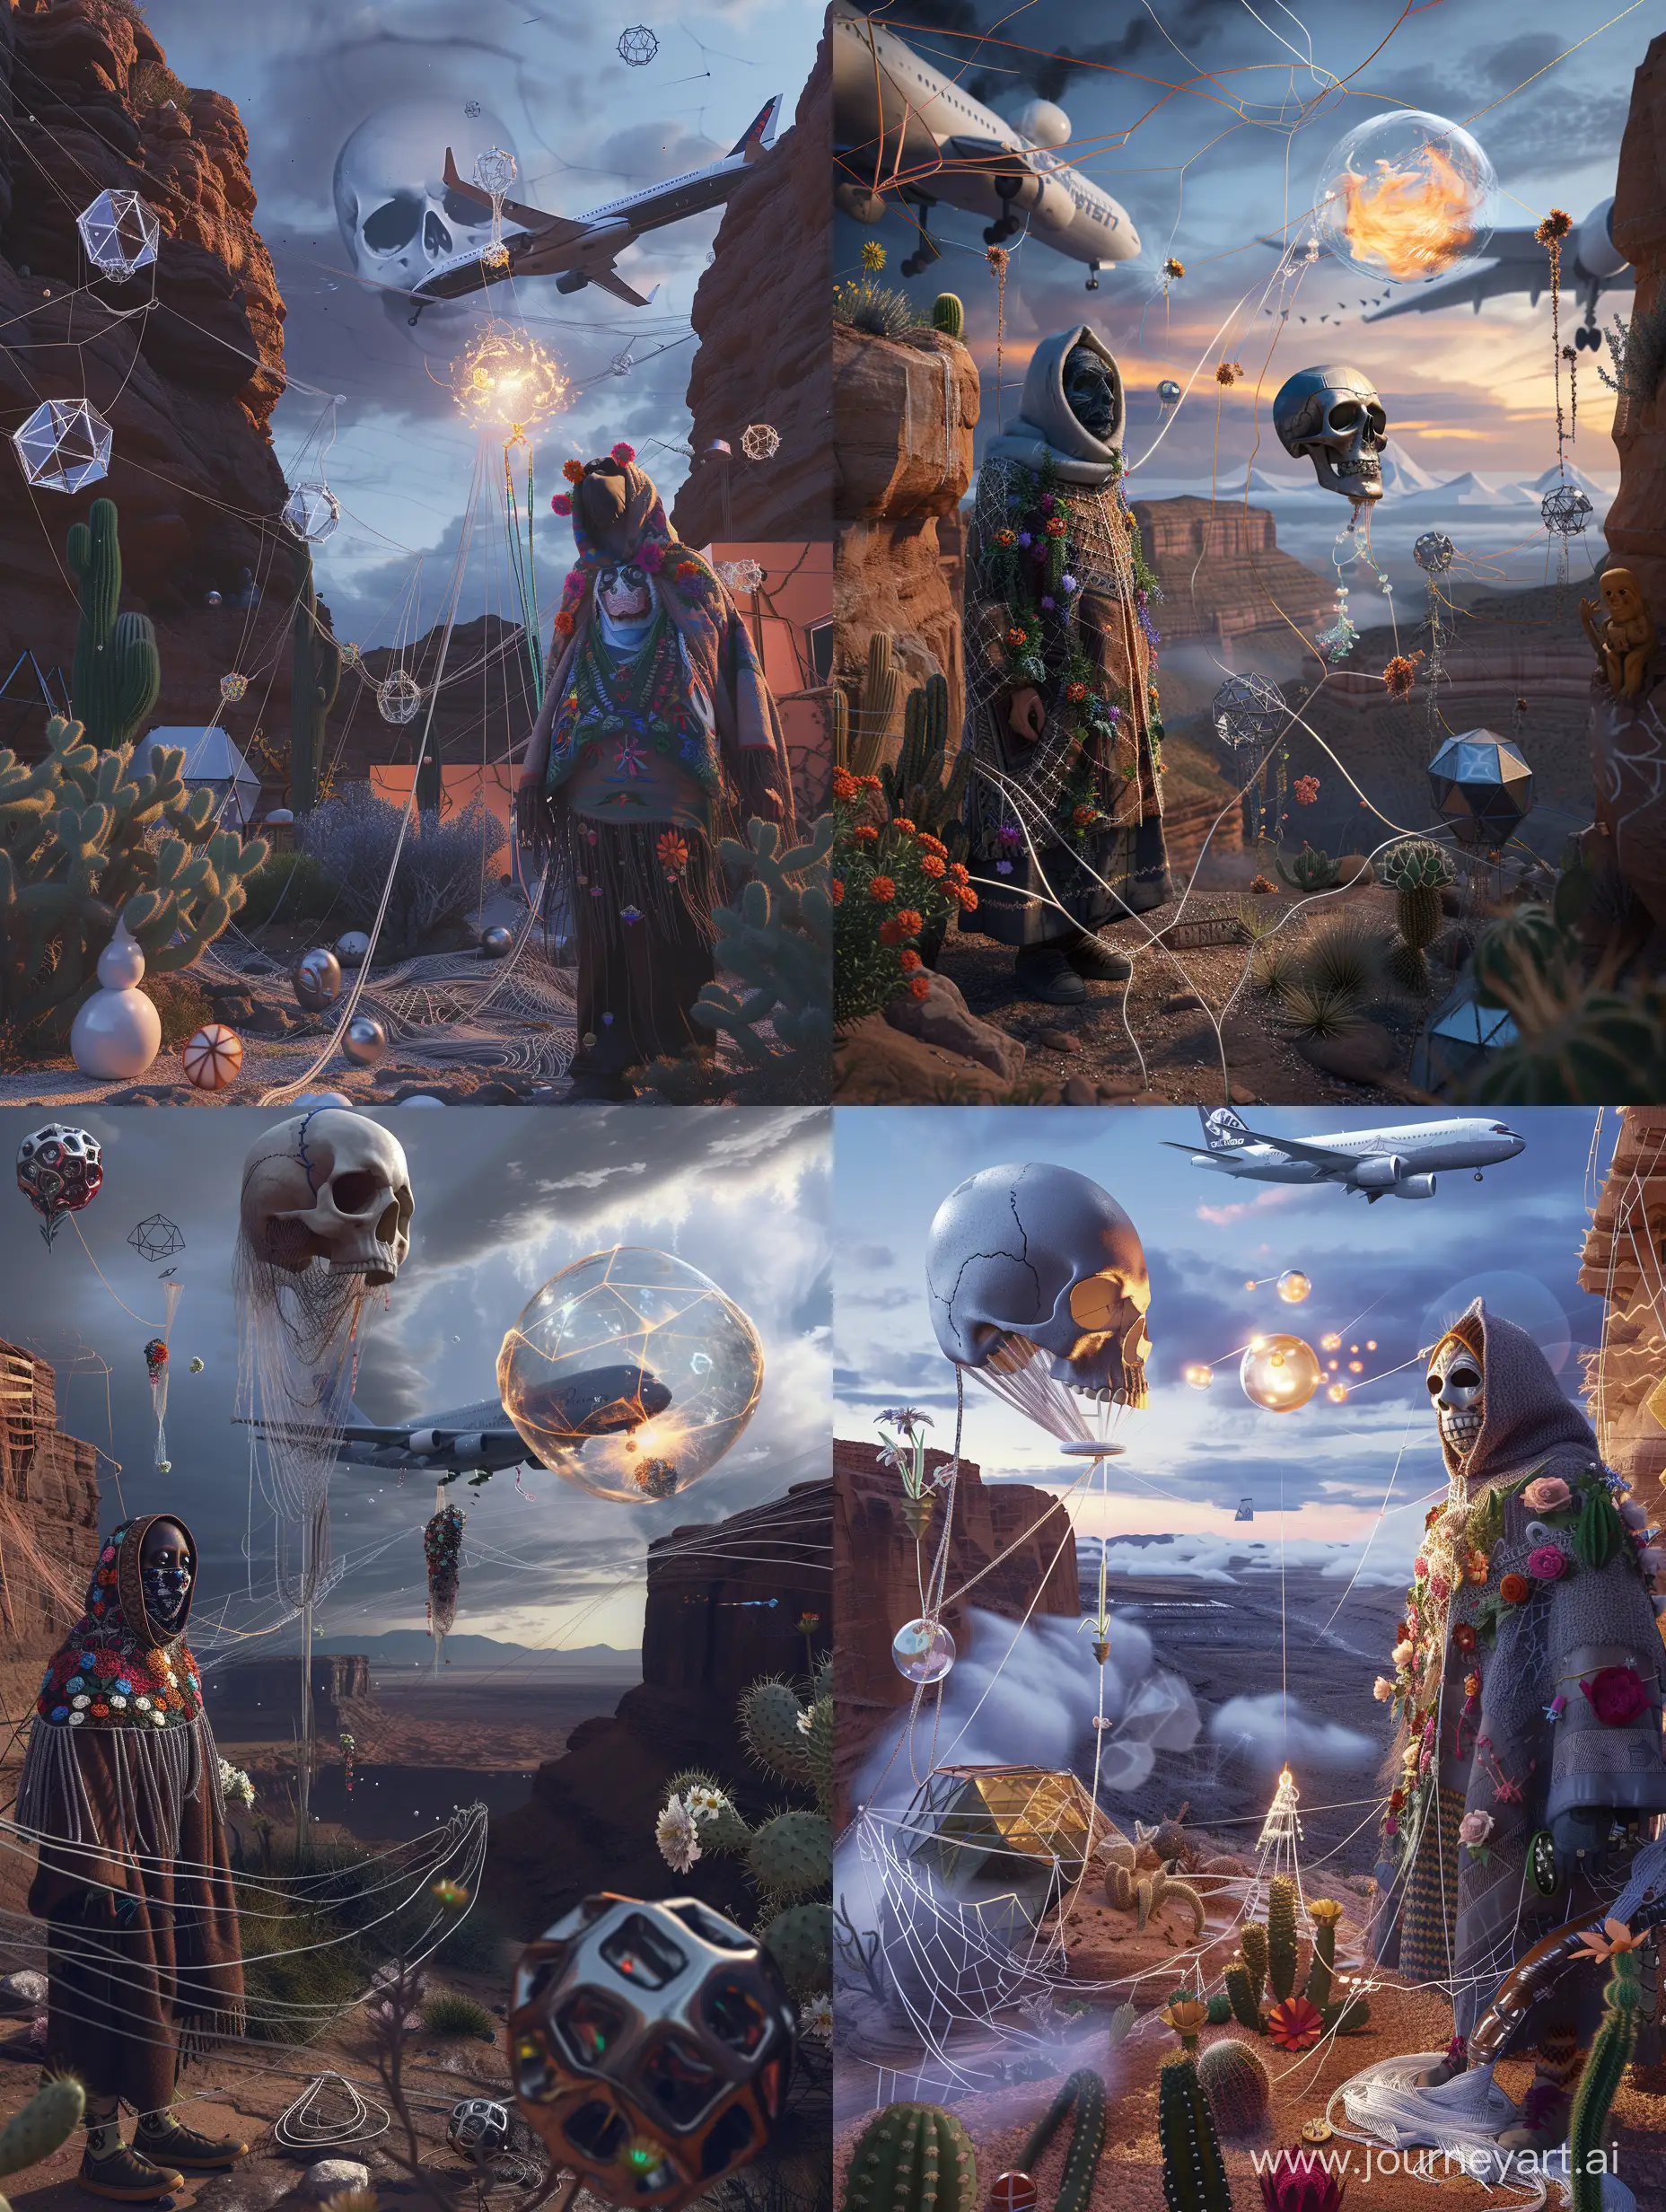 "Amidst the eerie setting of the overlook hotel, a skull ominously looms in the sky, while a tangled web of yarn and wires weaves through a desert canyon landscape at dusk. In this surreal scene, a masked sage adorned in a poncho embellished with flowers and cacti stands before an array of floating sculptures with varying transparent and metallic textures, accompanied by swirling metal liquid and a ghoul casting a bubble of burning opal liquid holographic magic. The entire setting is brought to life by highly detailed and cinematic lighting, with a minimalistic hallucination of geodesic shapes in the background. As the night sky descends, a Boeing 747 appears just above the clouds, adding an extra touch of moody allure to the already captivating scene."